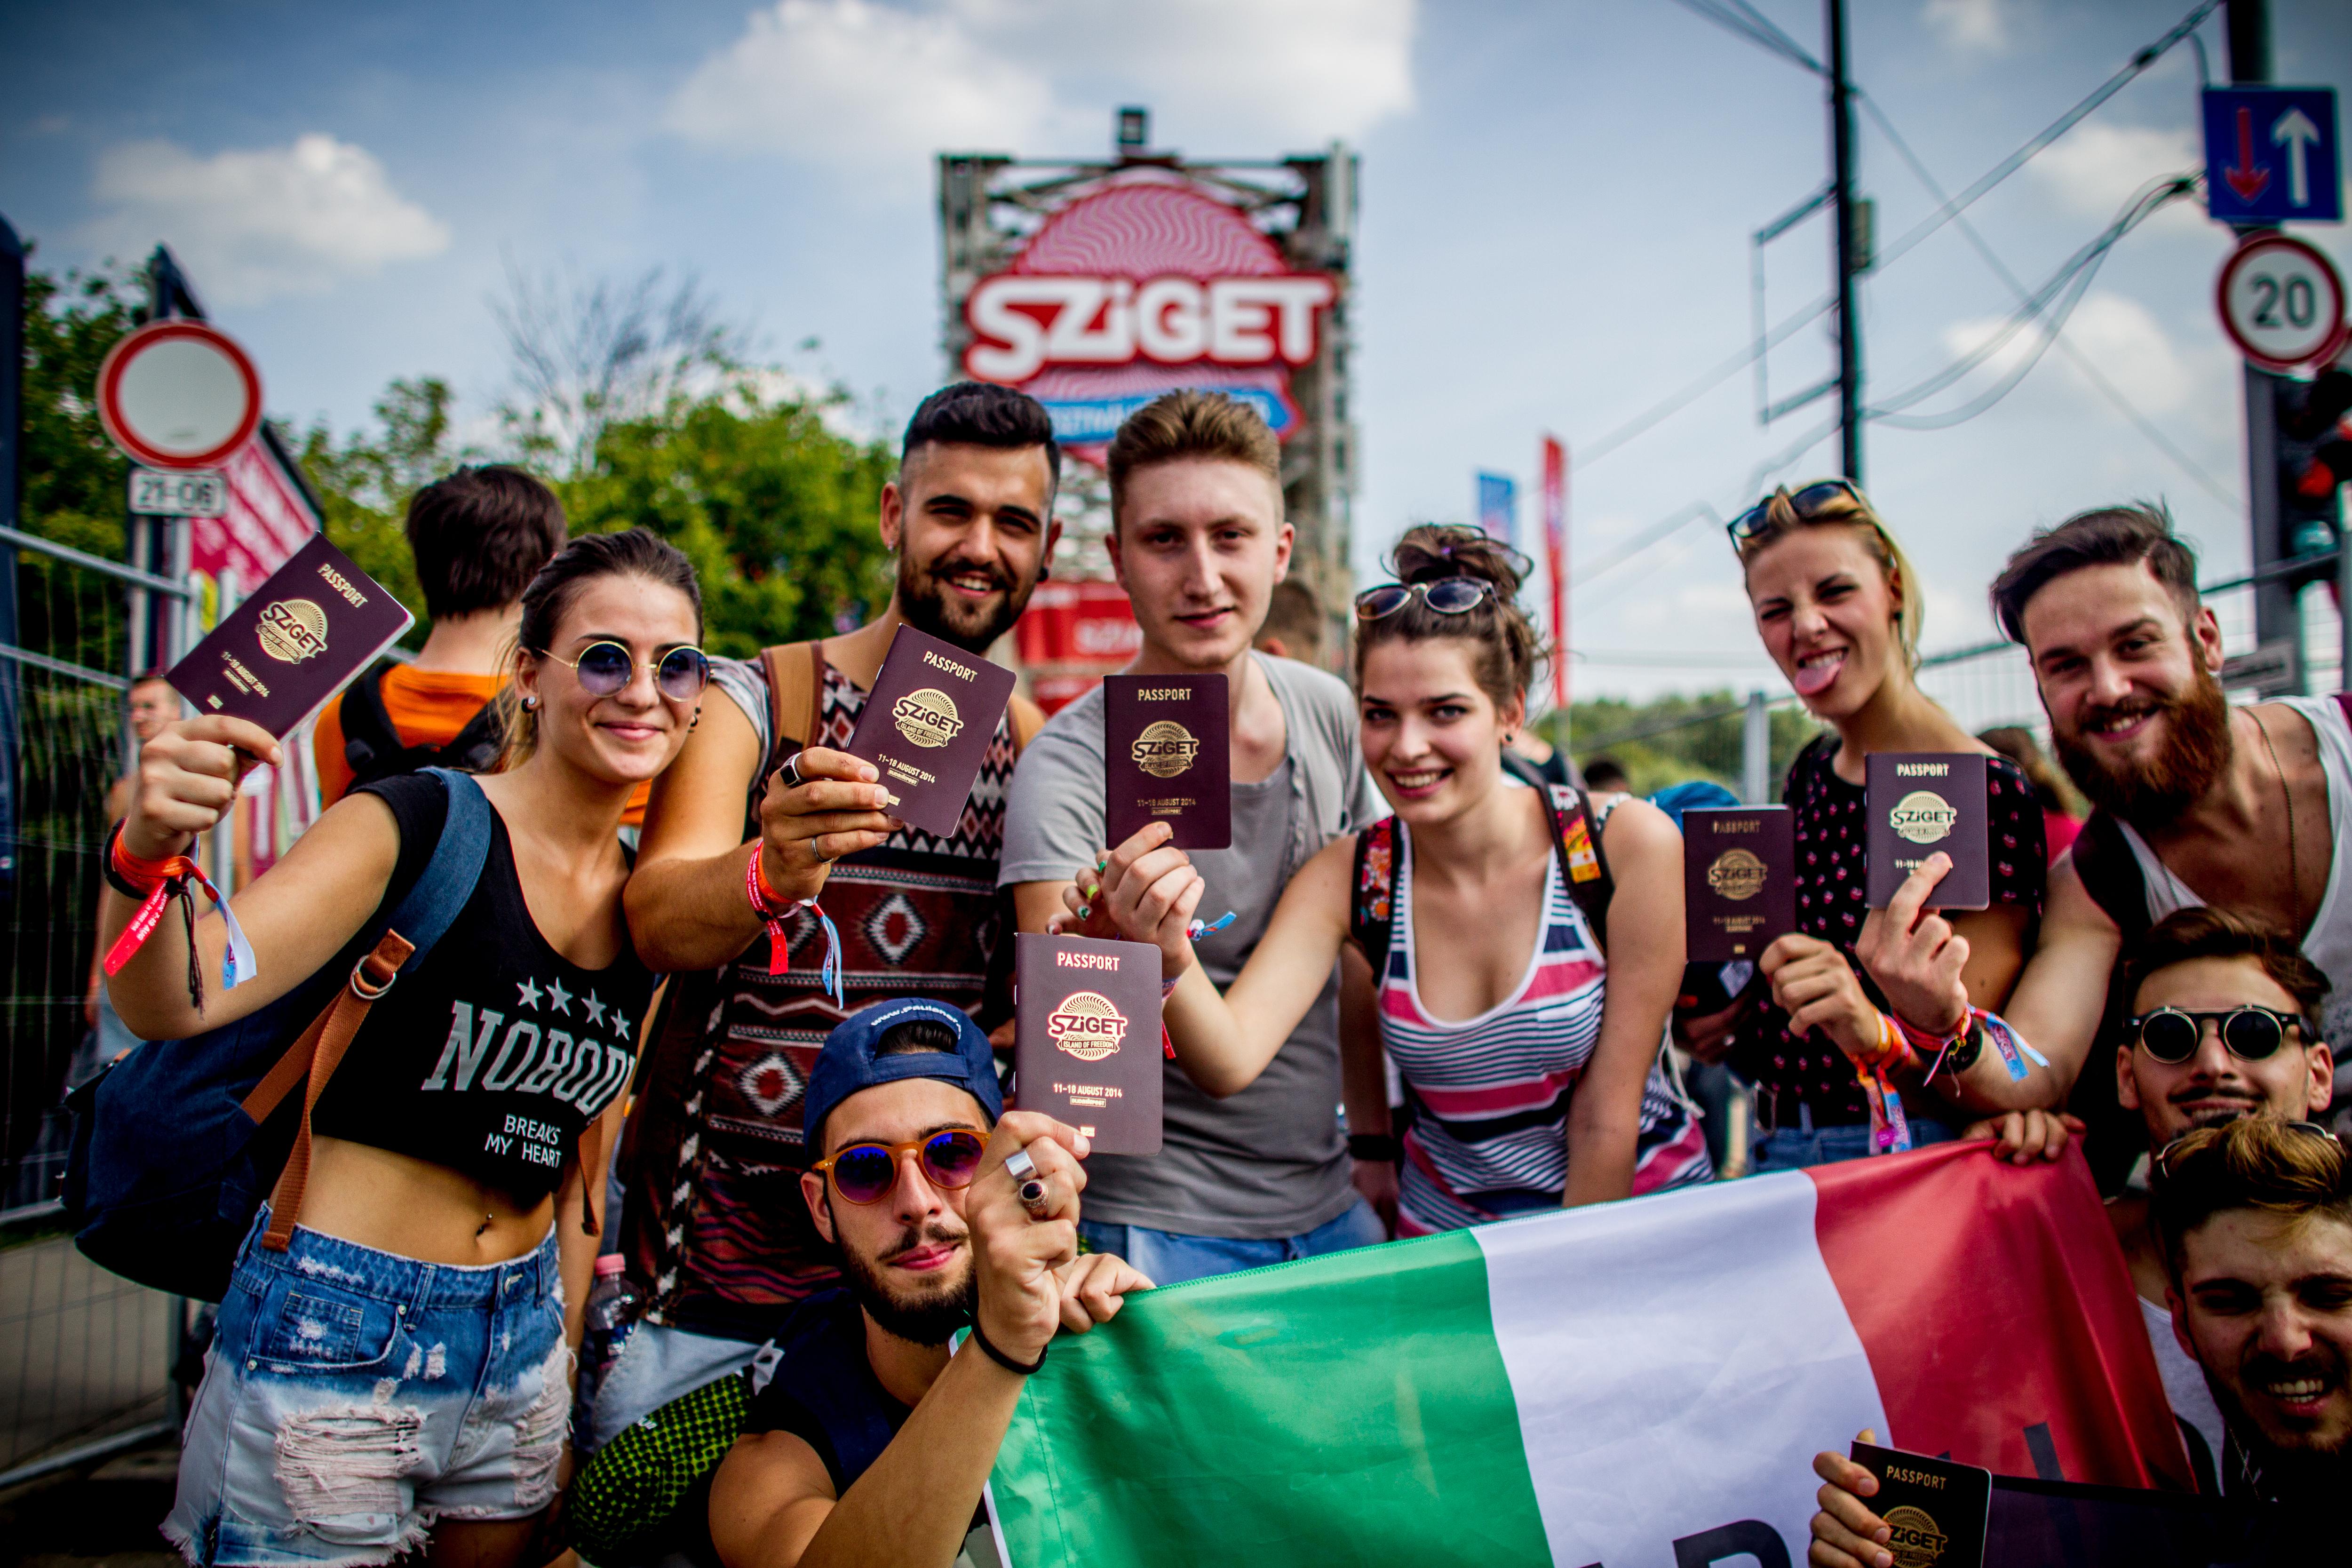 First Names Announced For Sziget Festival 2015